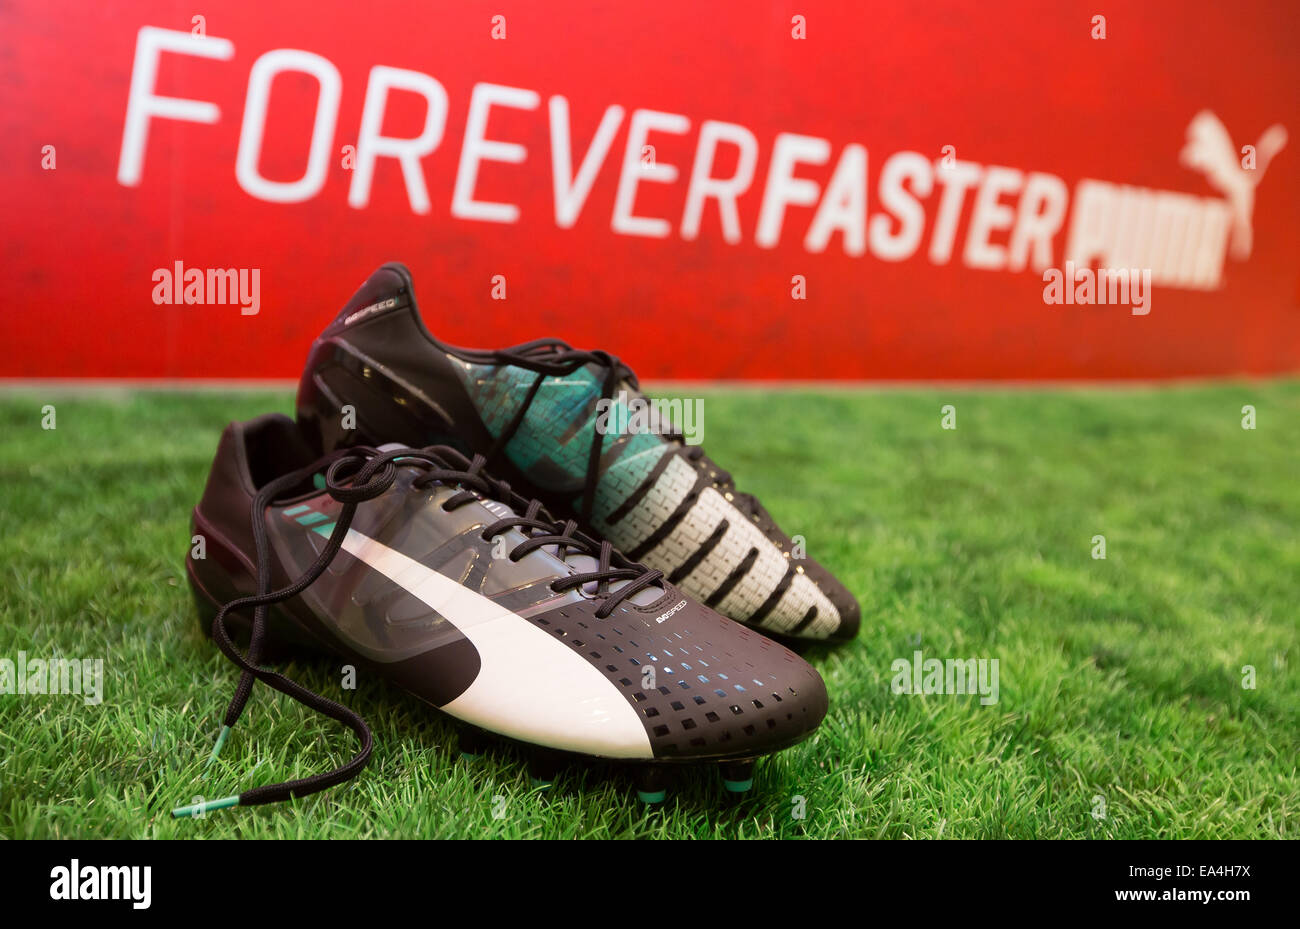 familia lecho Injerto PUMA football boot evoSPEED lying on the grass with Forever Faster slogan  and PUMA logo in the background. COMMERCIAL HANDOUT/EDITORIAL USE ONLY/NO  SALES. Please quote the source "photo: PUMA/Ralf Roedel Stock Photo -